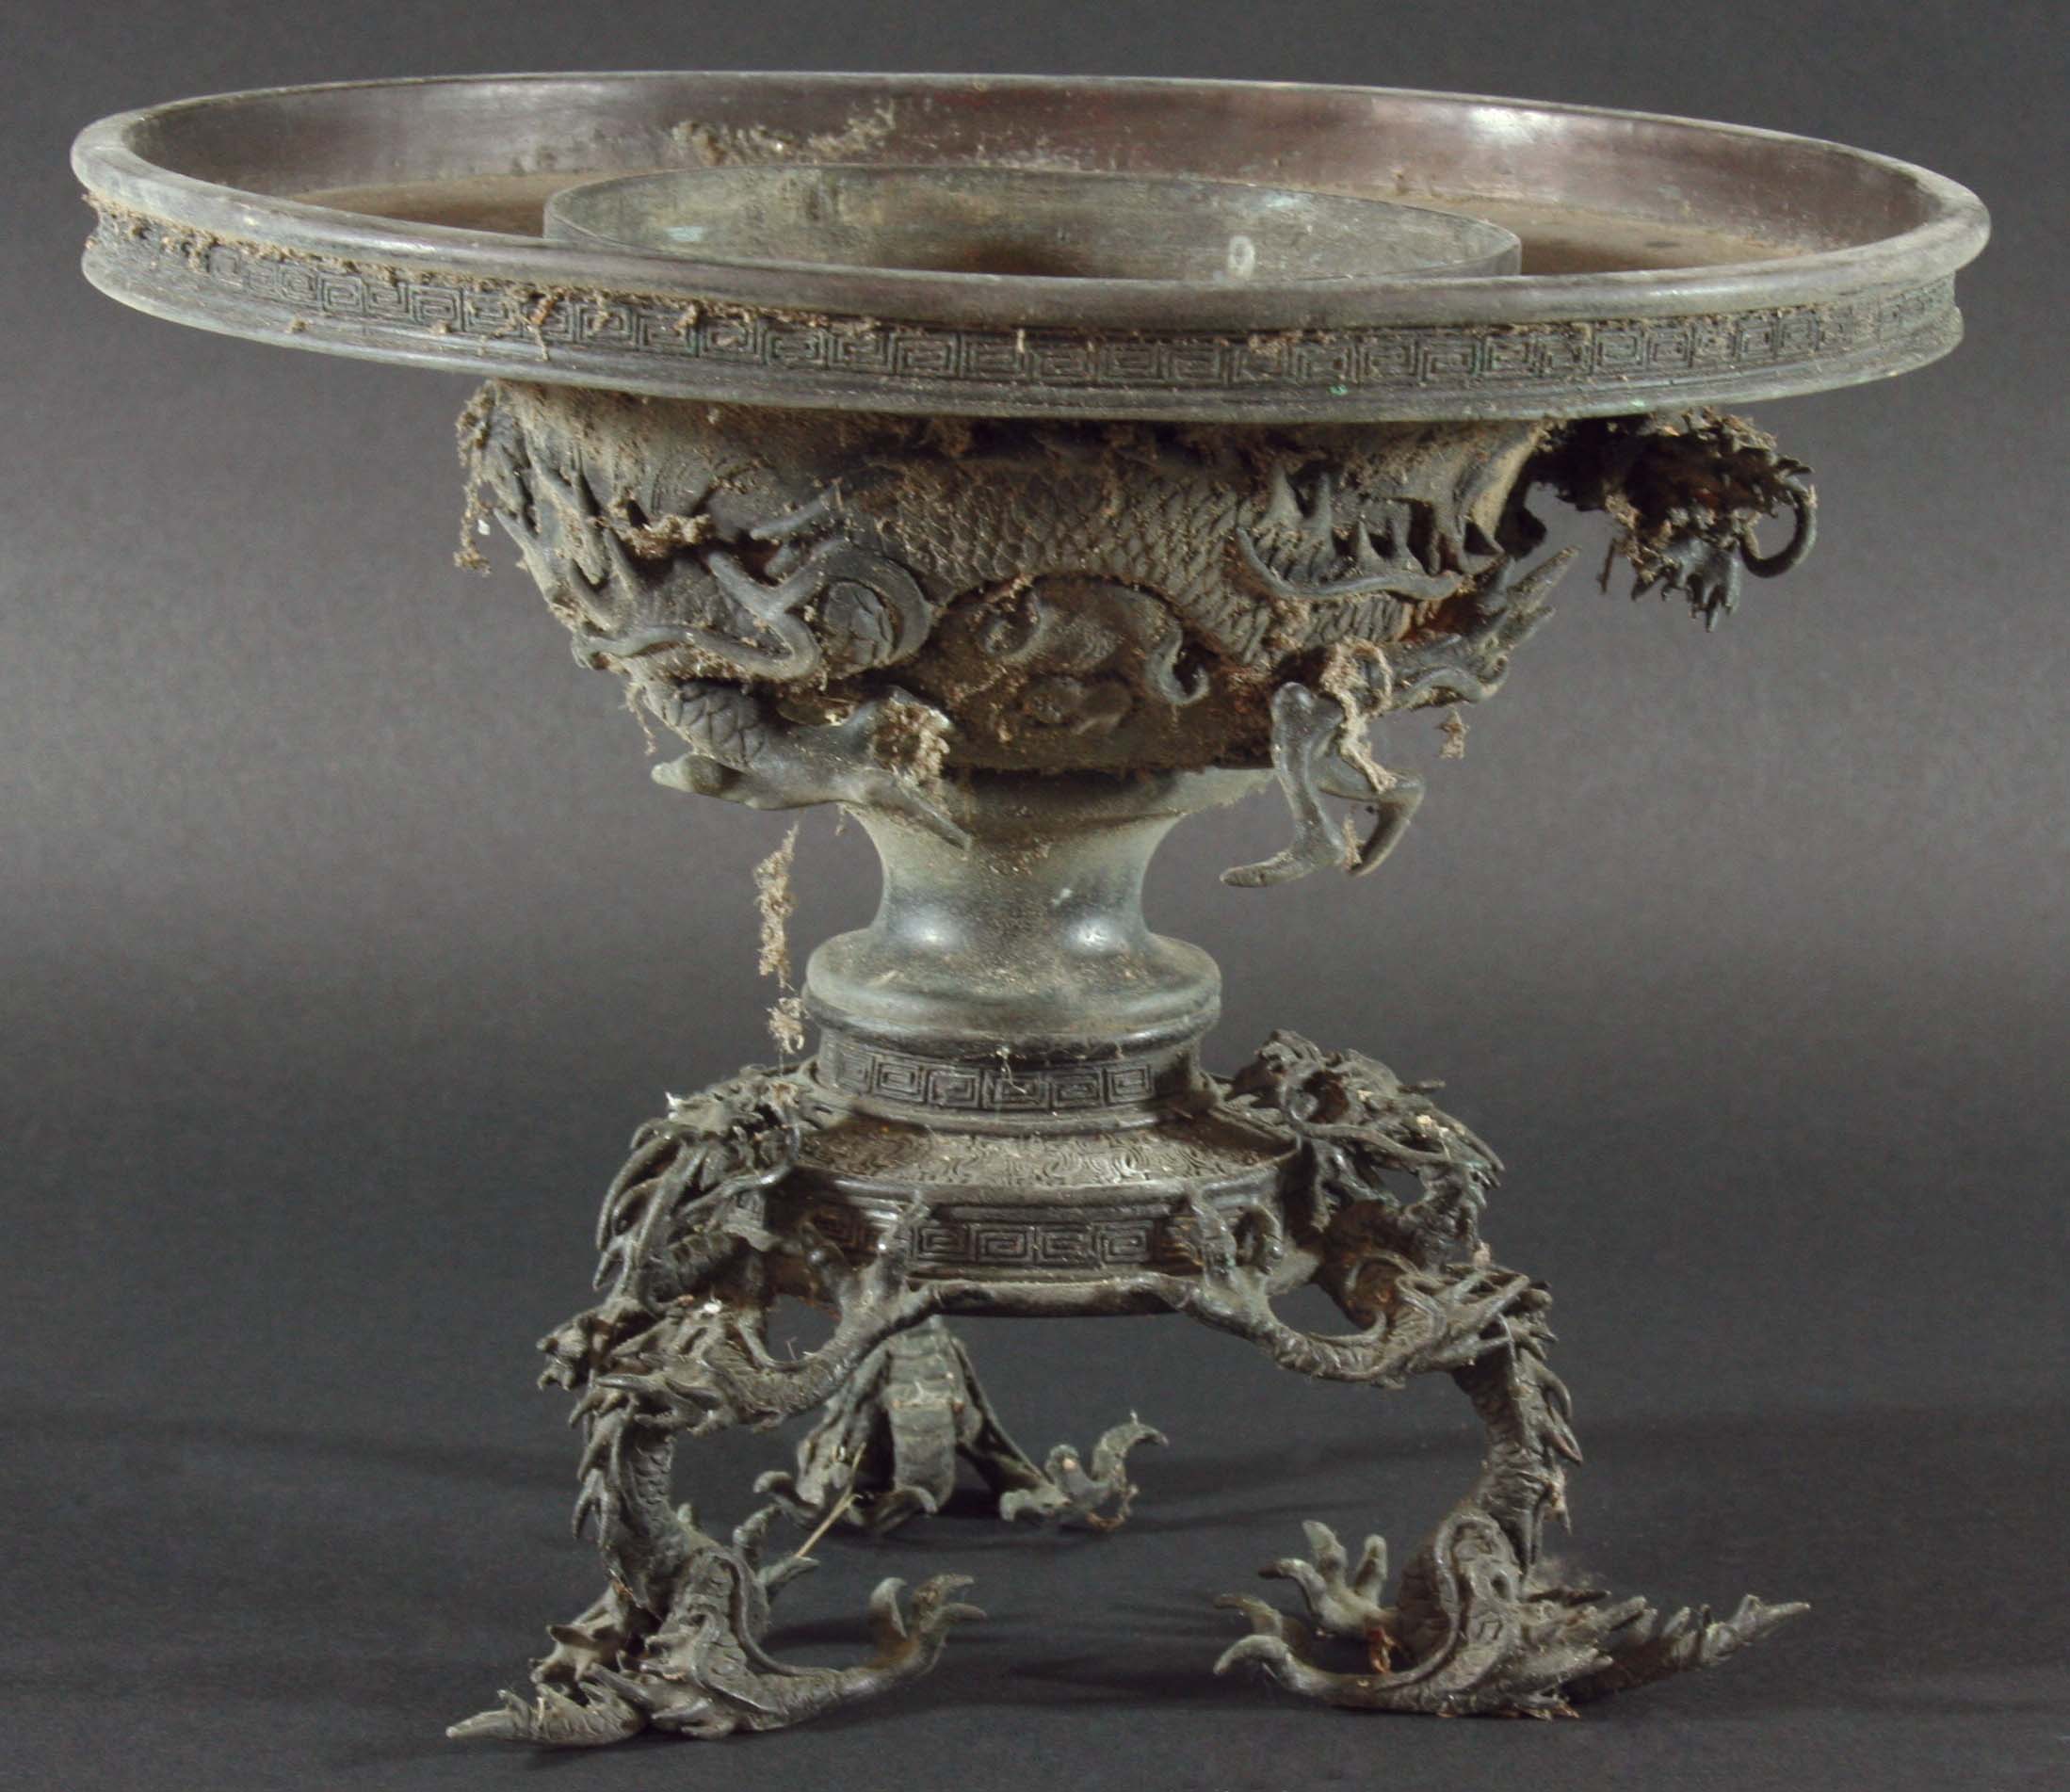 CHINESE BRONZE STAND, cast as shallow bowl decorated with dragons in relief, on a tripod base with